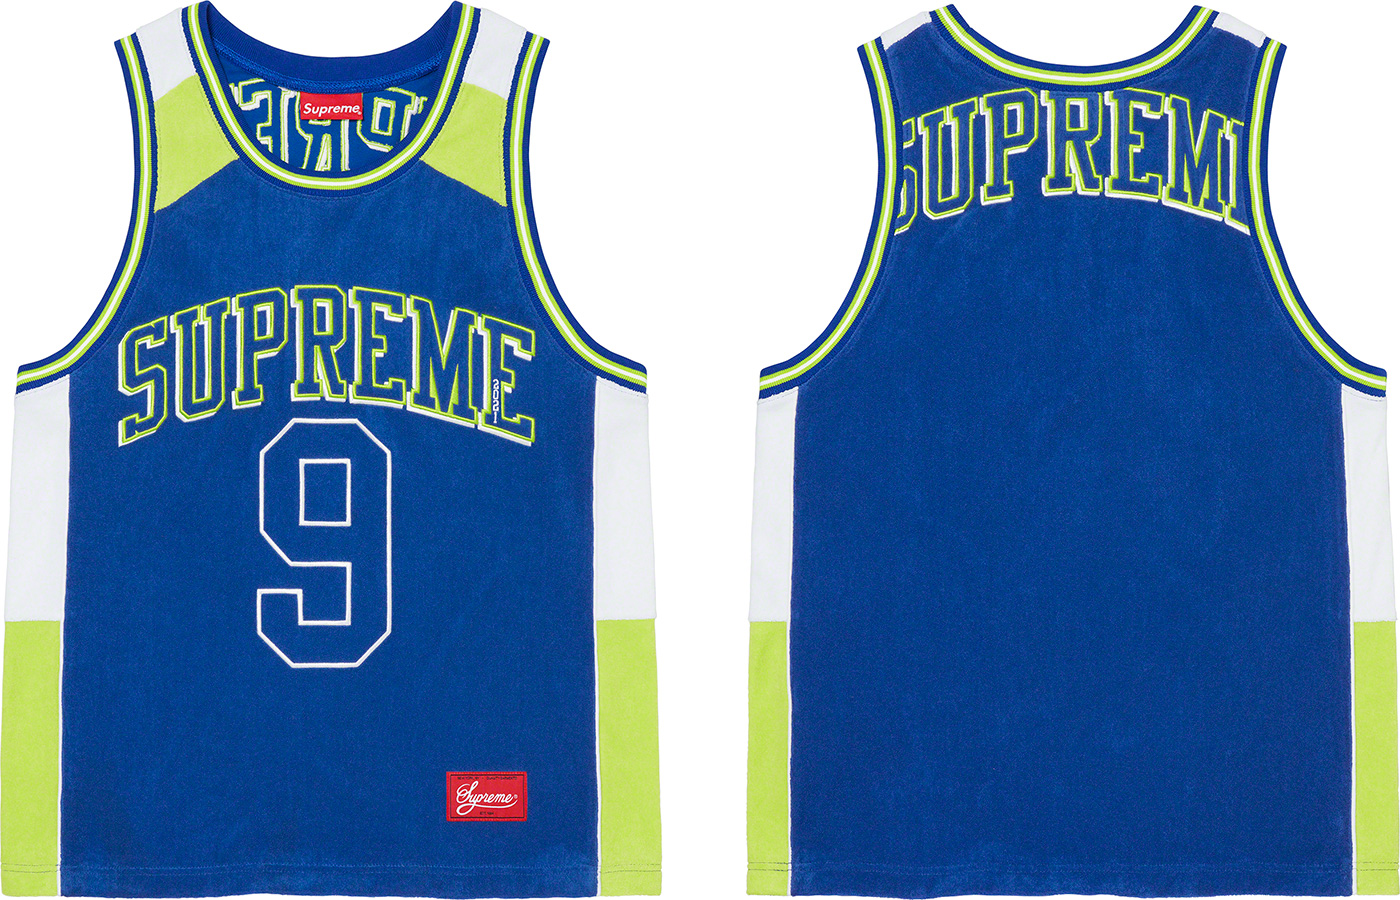 Supreme Terry Basketball Jersey Stone (SS21)